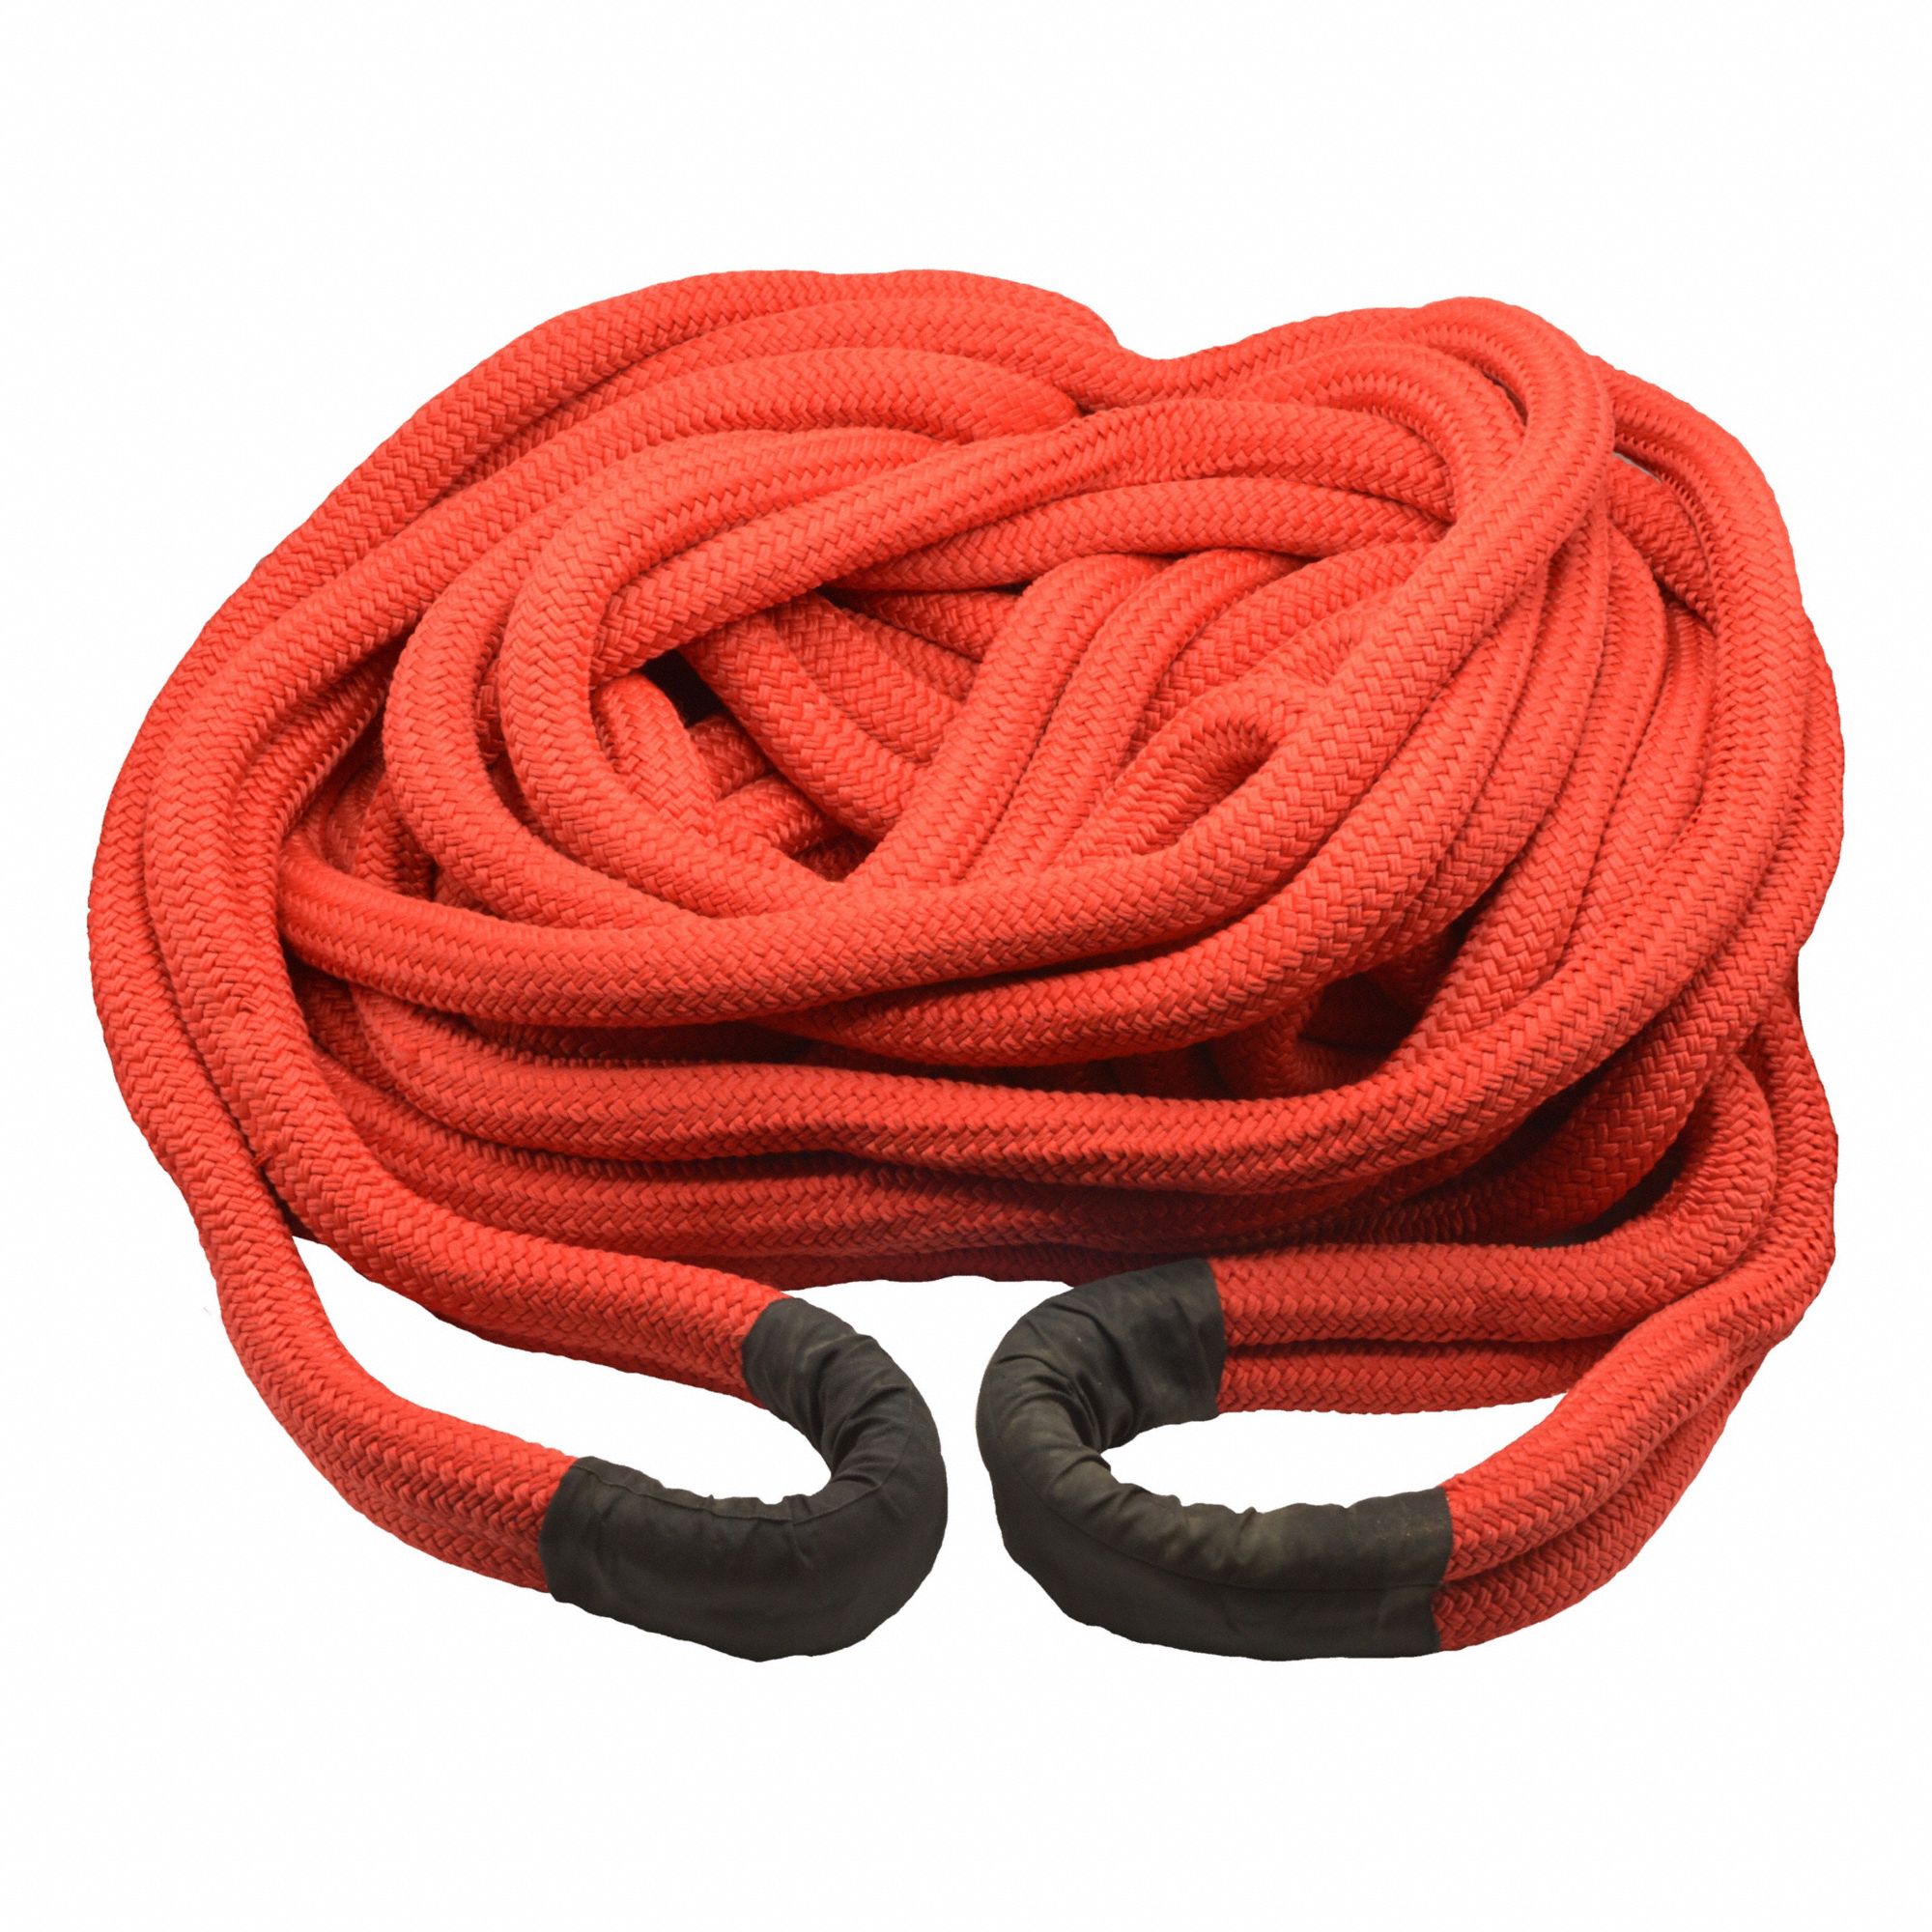 Recovery Rope: 30 ft Lg, 1 1/2 in Dia, Nylon, Loop, Nylon, Red, Includes Storage Bag